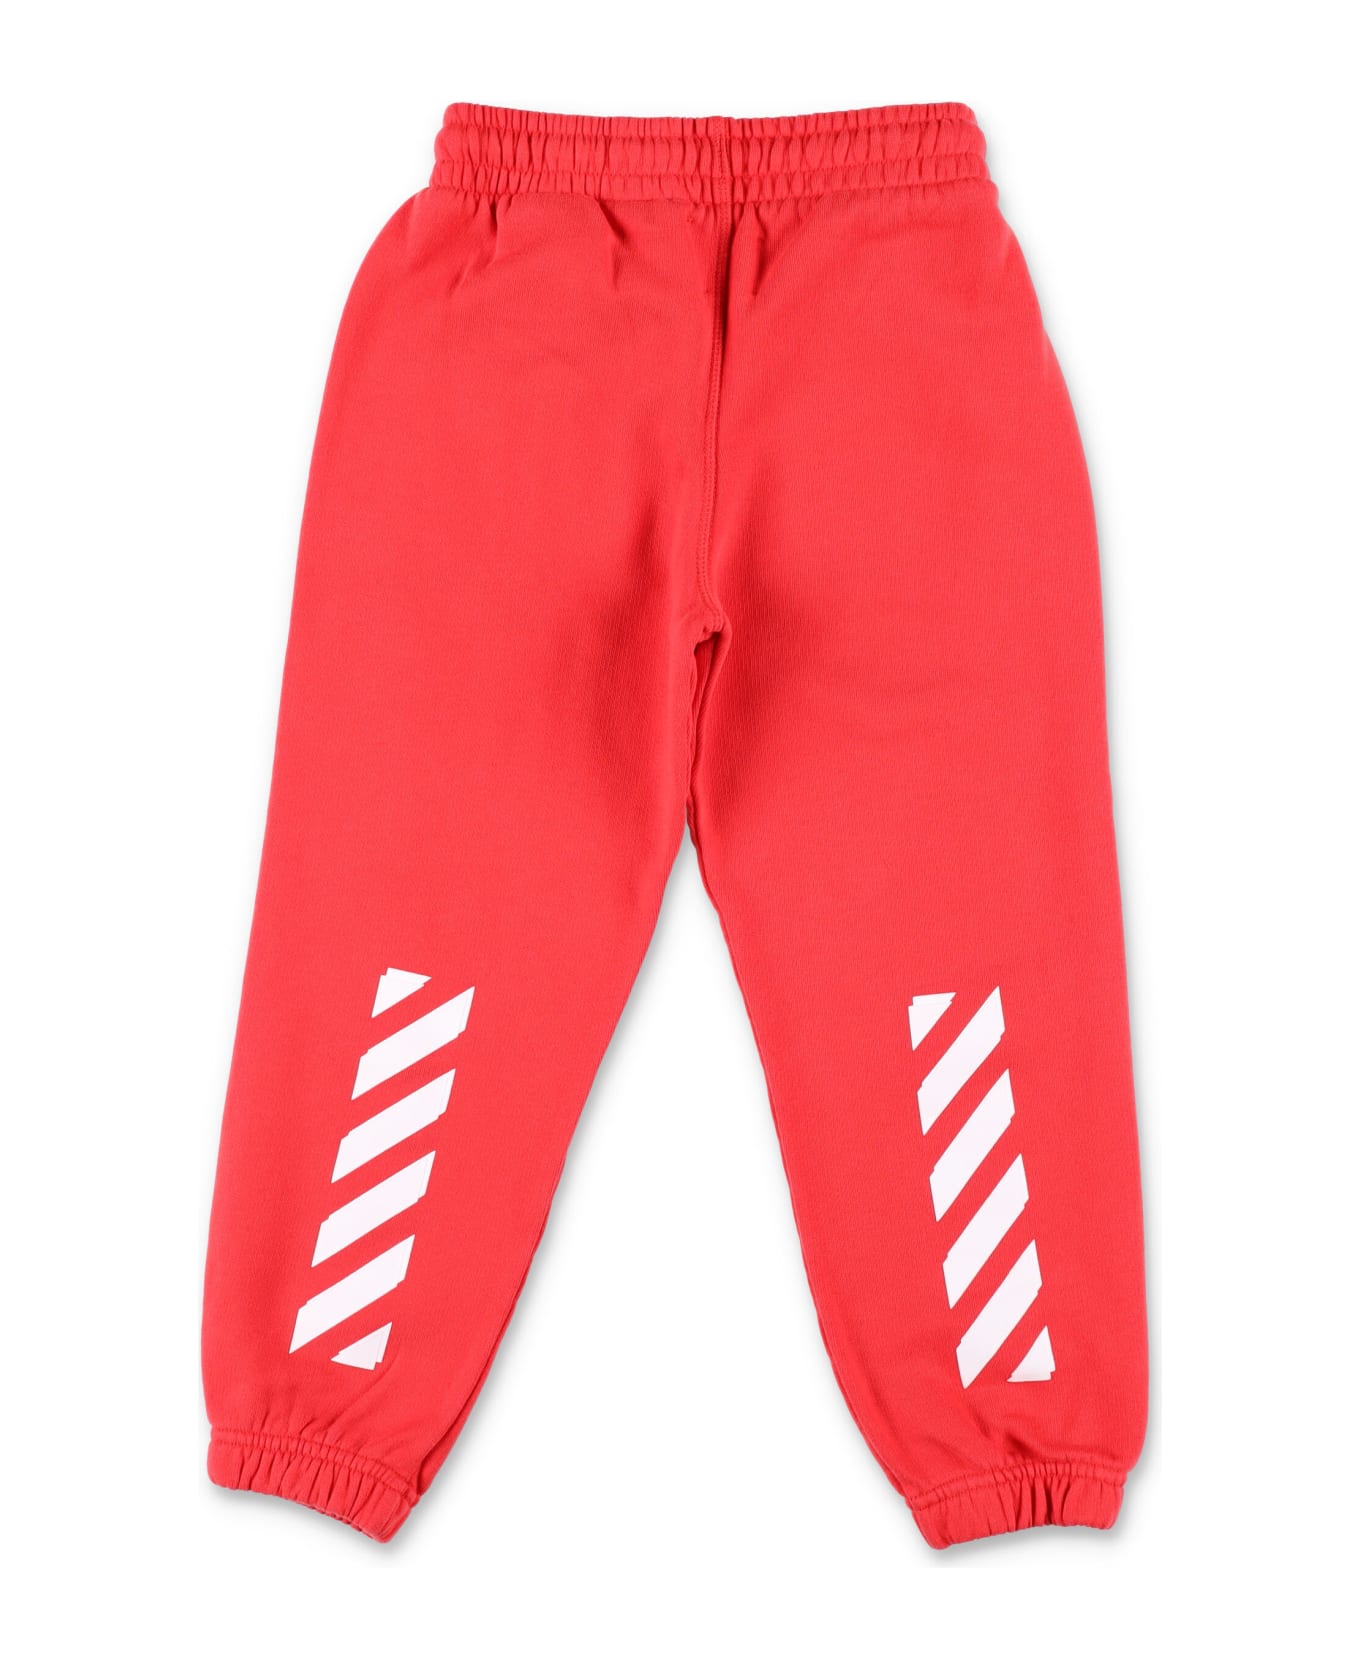 Off-White Rubber Arrow Sweat Pants - RED WHITE